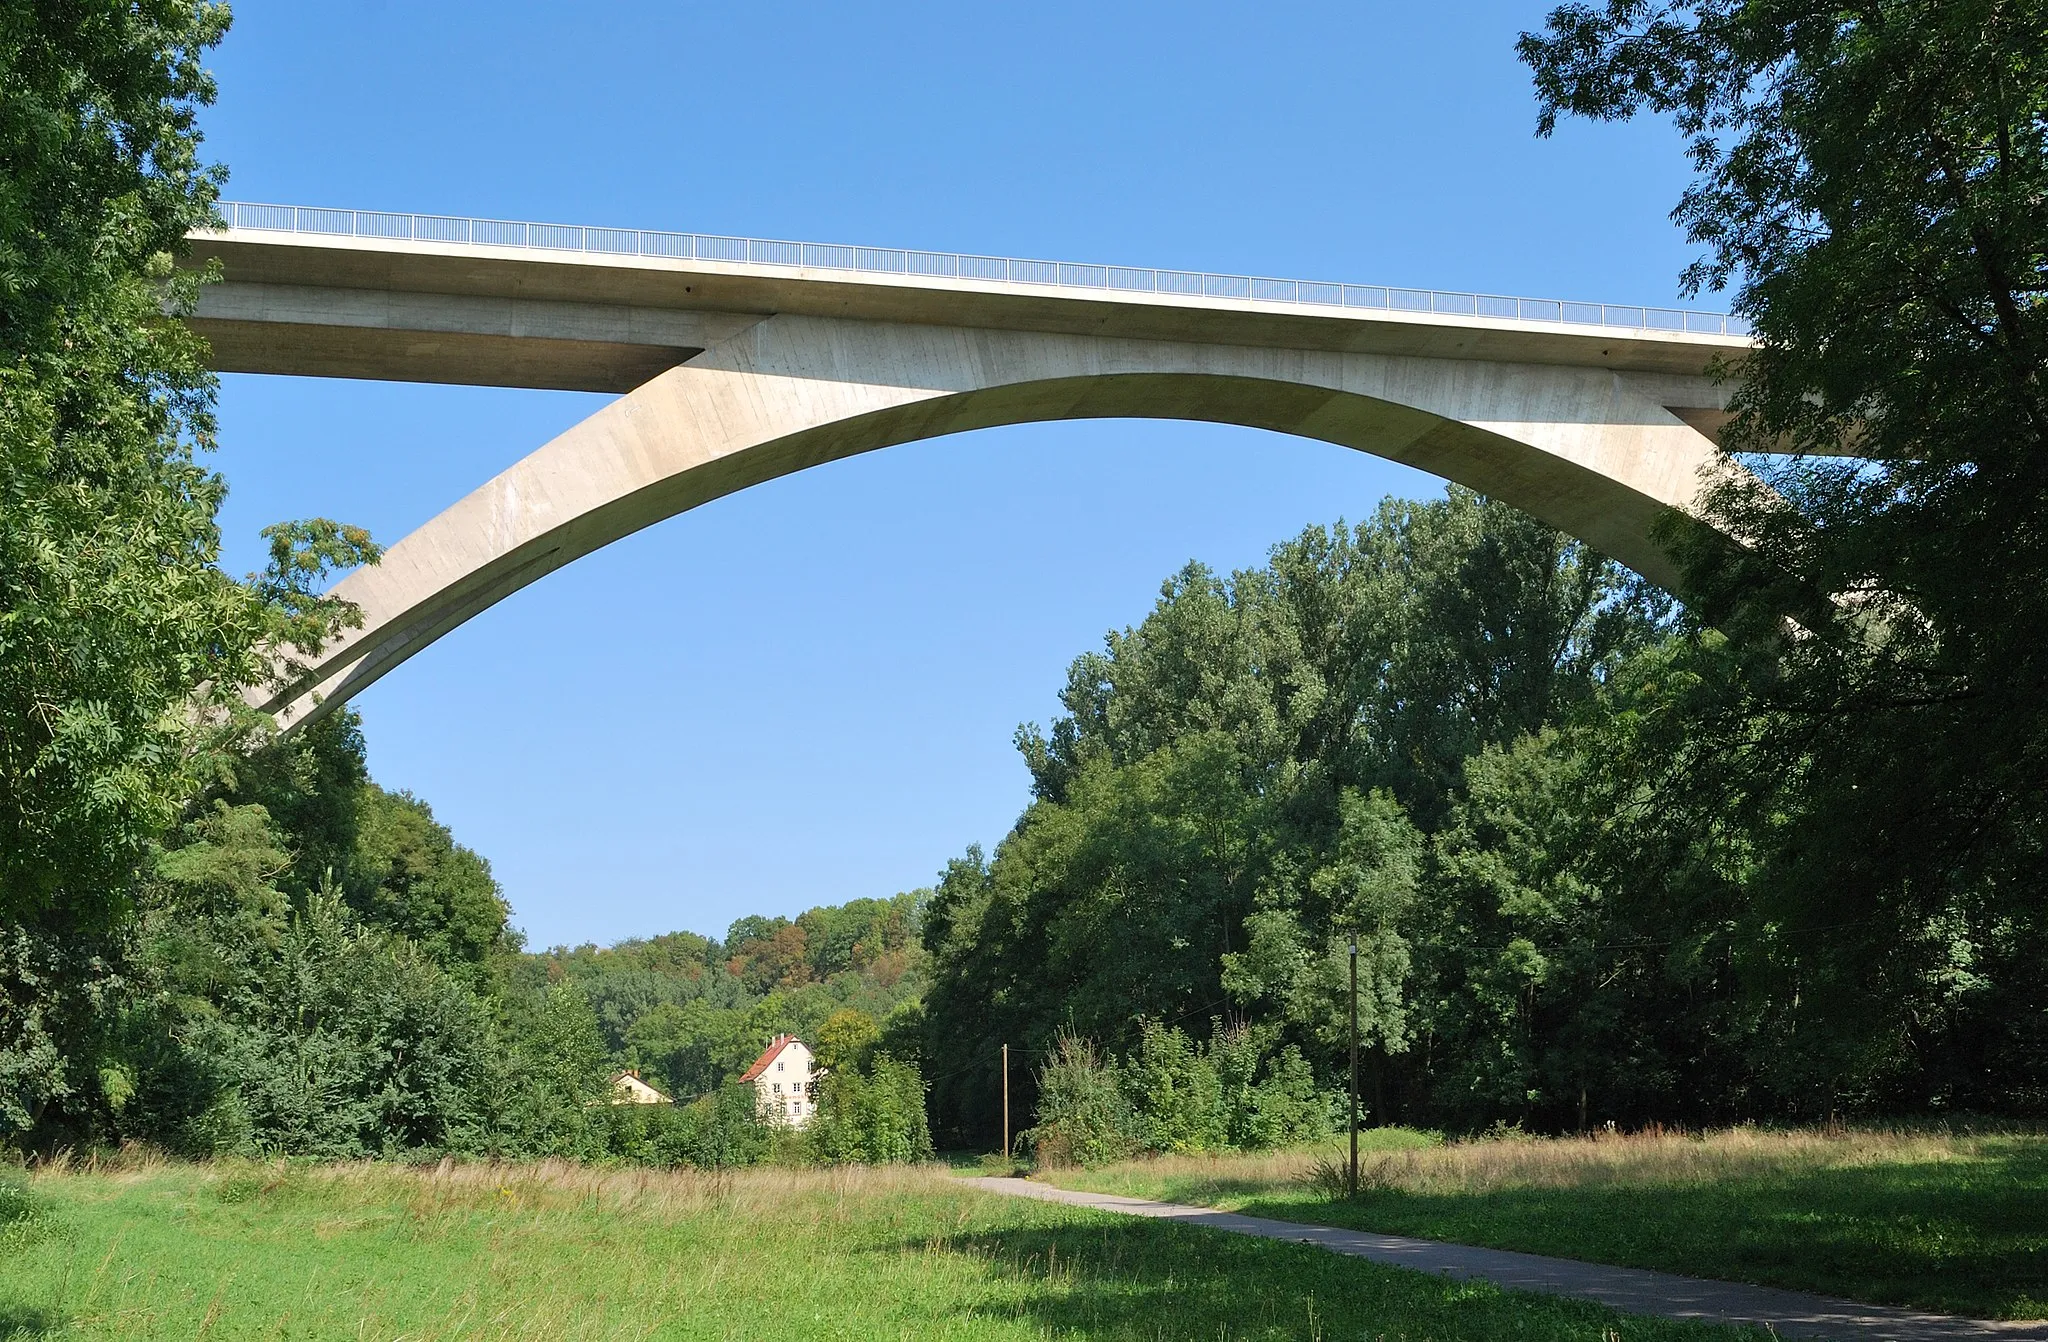 Photo showing: Viaduct of the German national road B10 over the valley of the river Glems nearby Schwieberdingen in Baden-Württemberg in Germany.